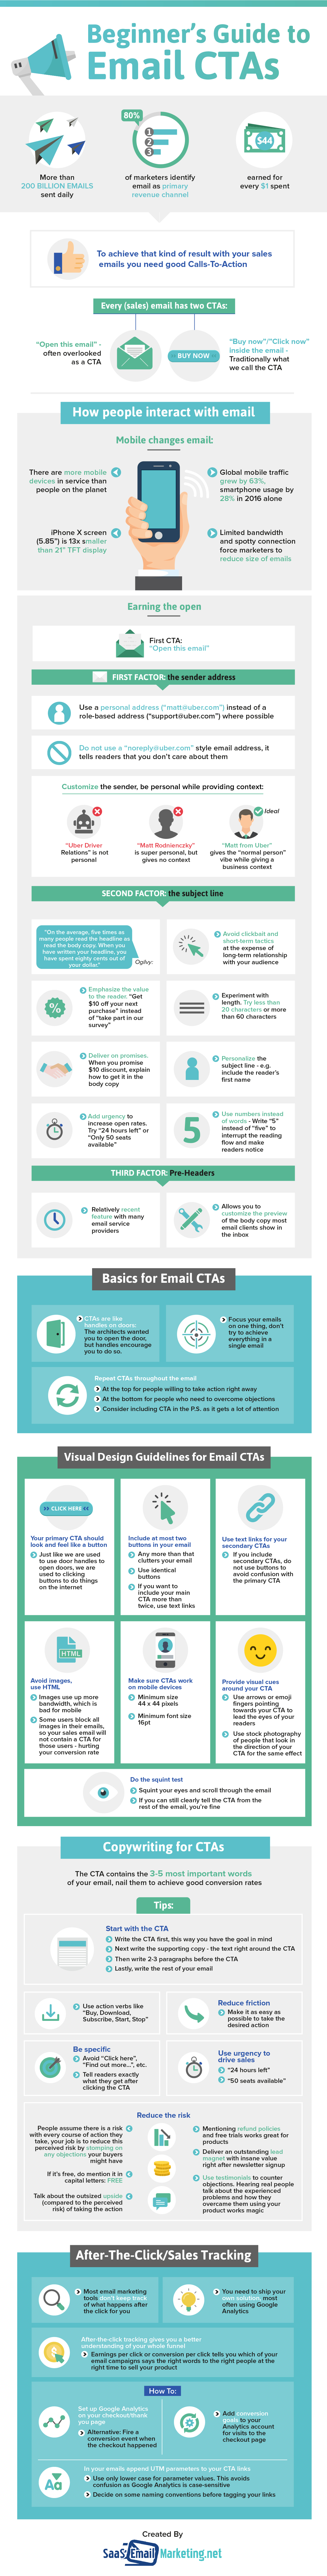 beginner's guide to email cta infographic header